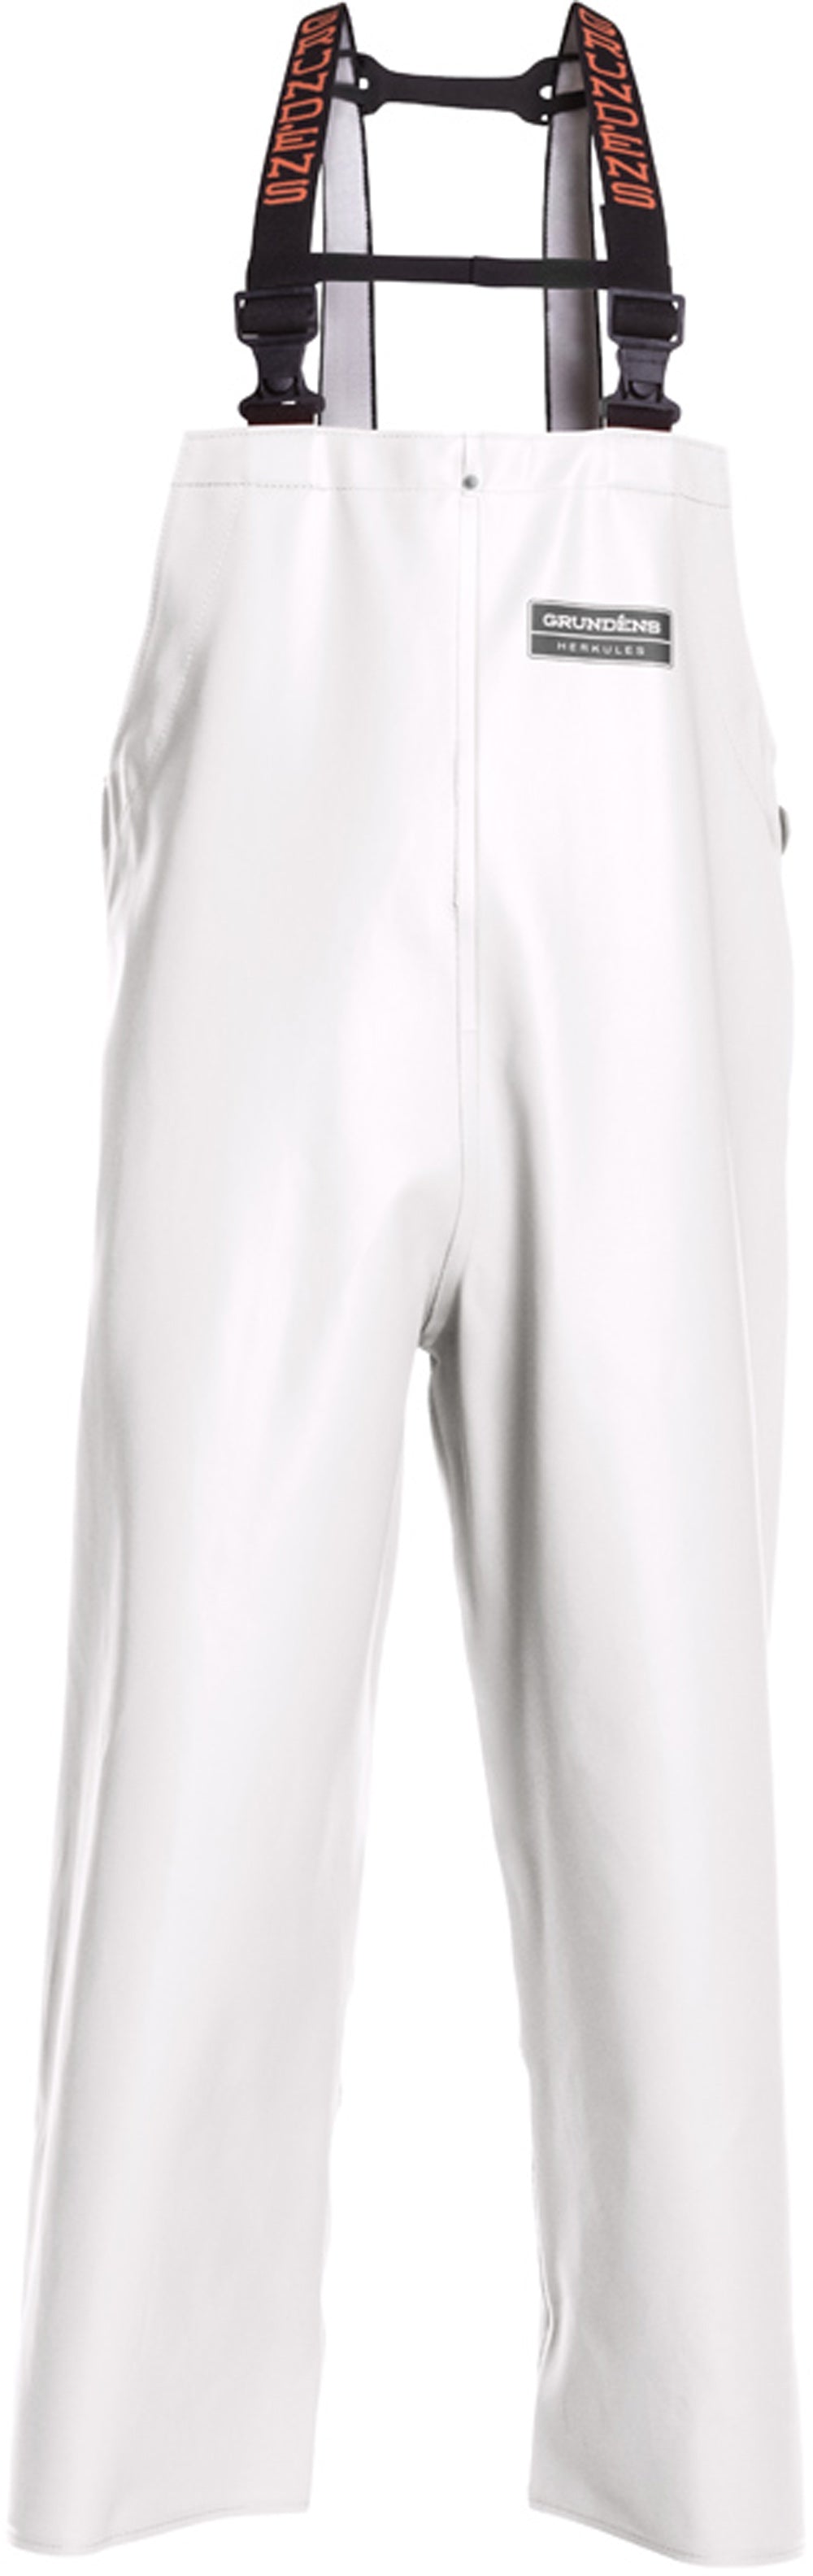 Herkules 16 Bib Pant in White color from the front view